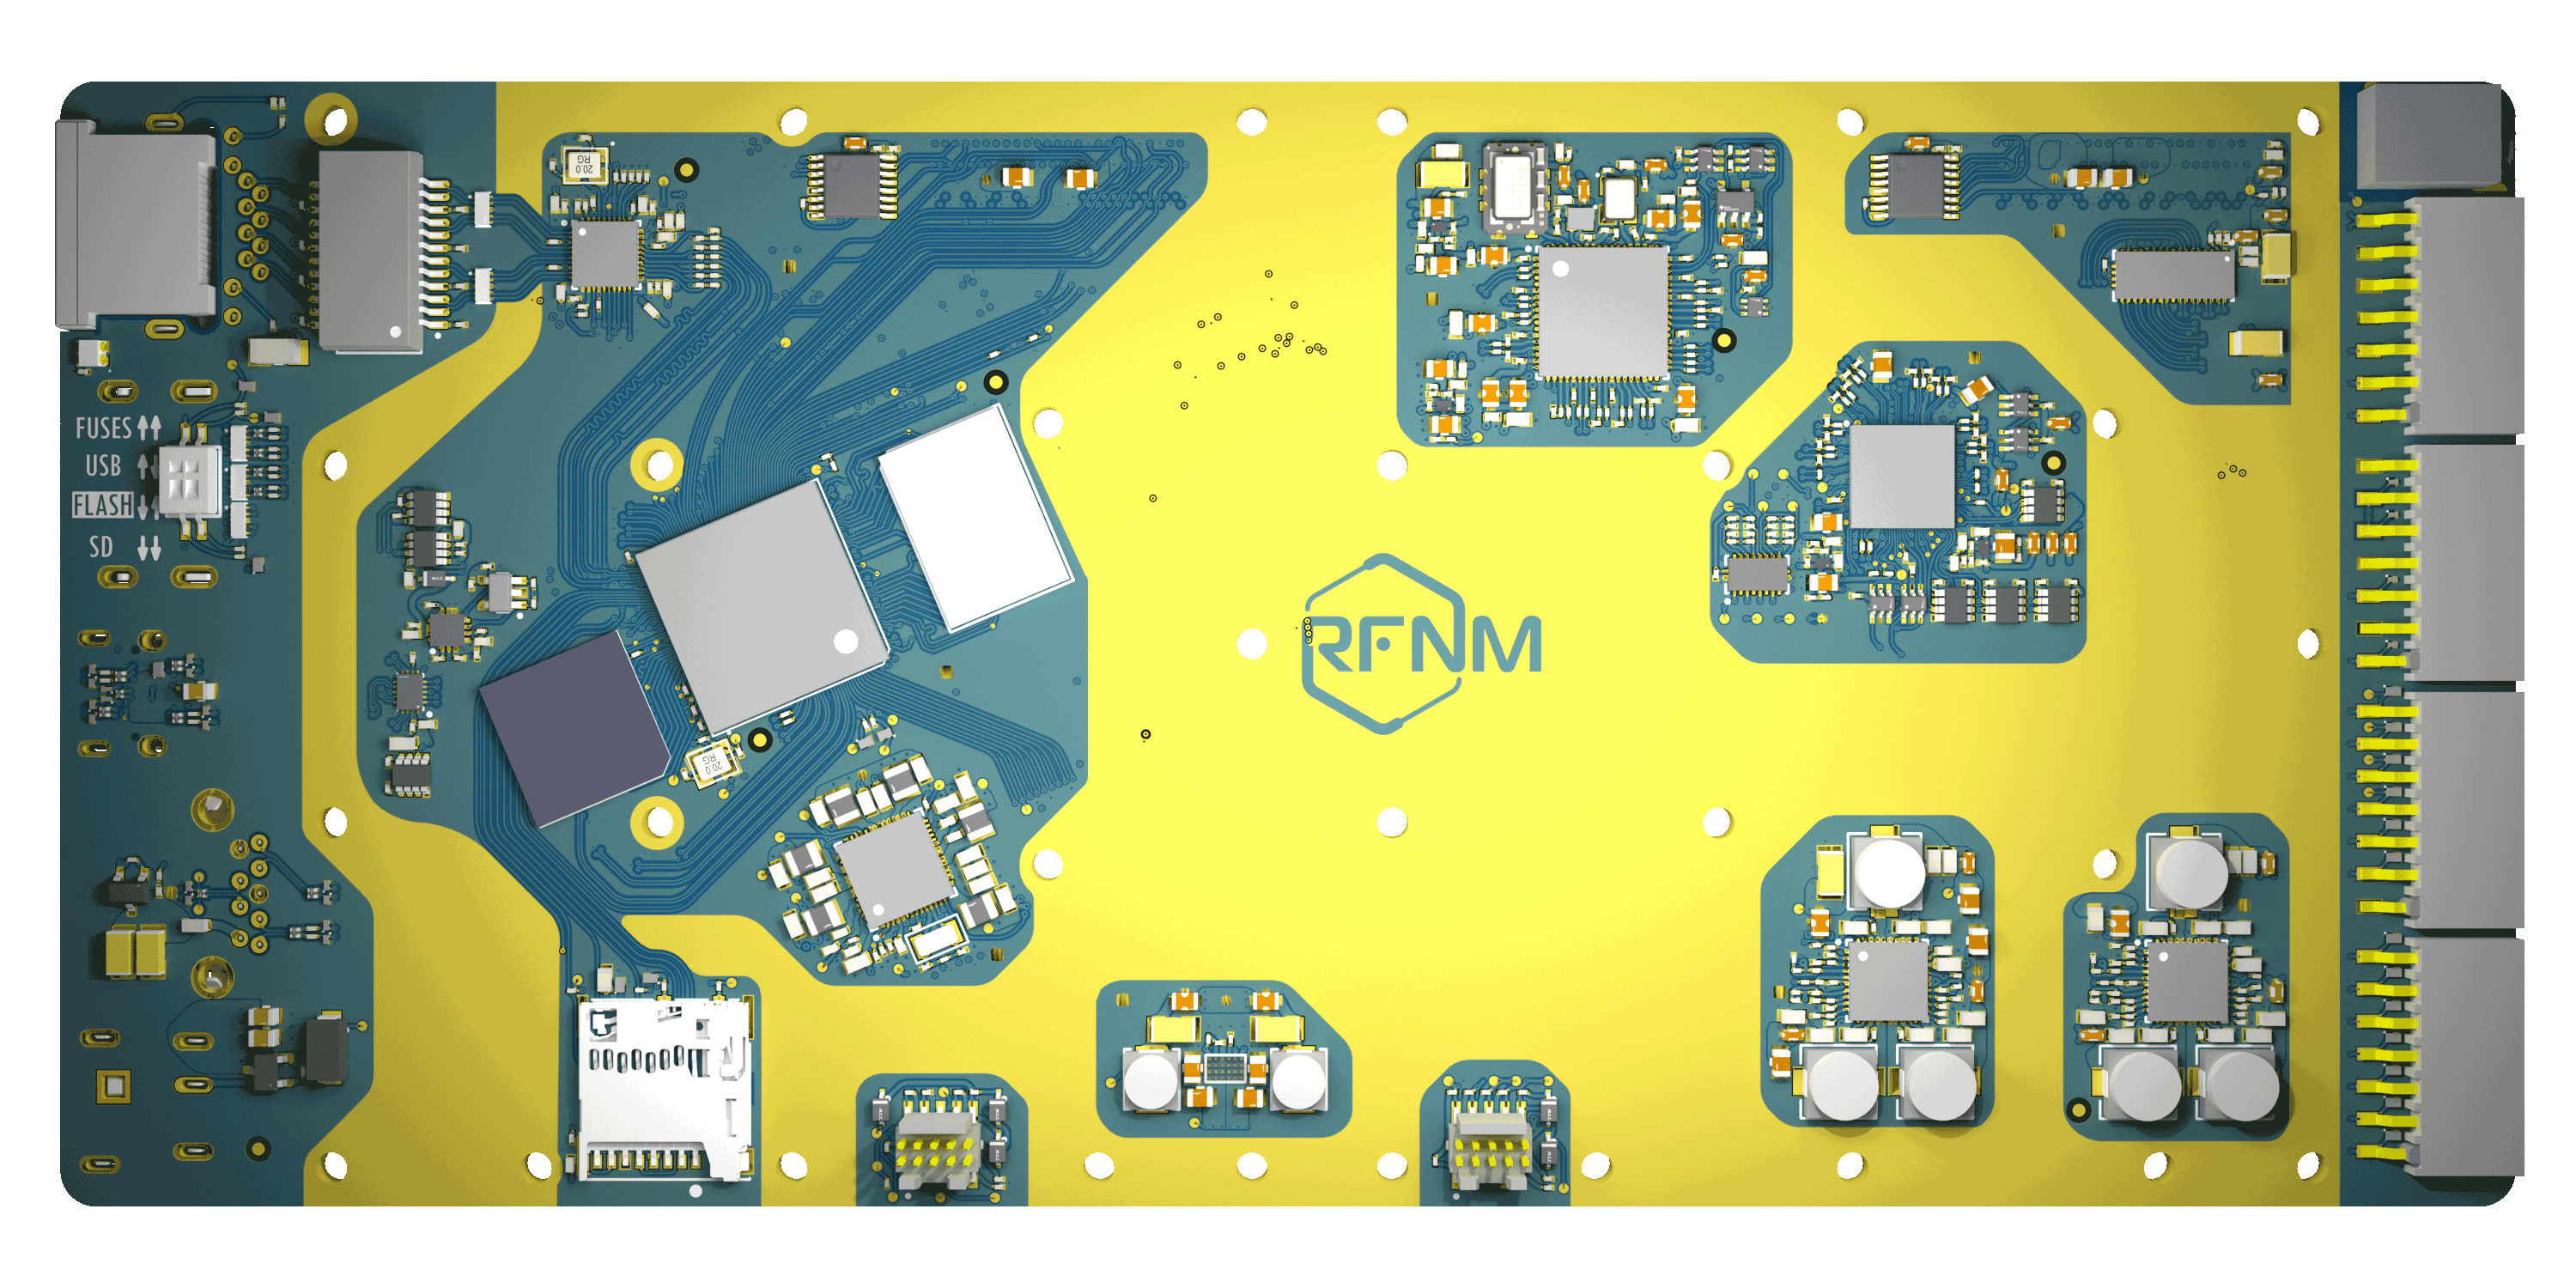 The RFNM: A Next Generation SDR with 10 MHz to 7200 MHz tuning range, 12-Bit  ADCs and up to 612 MHz Bandwidth